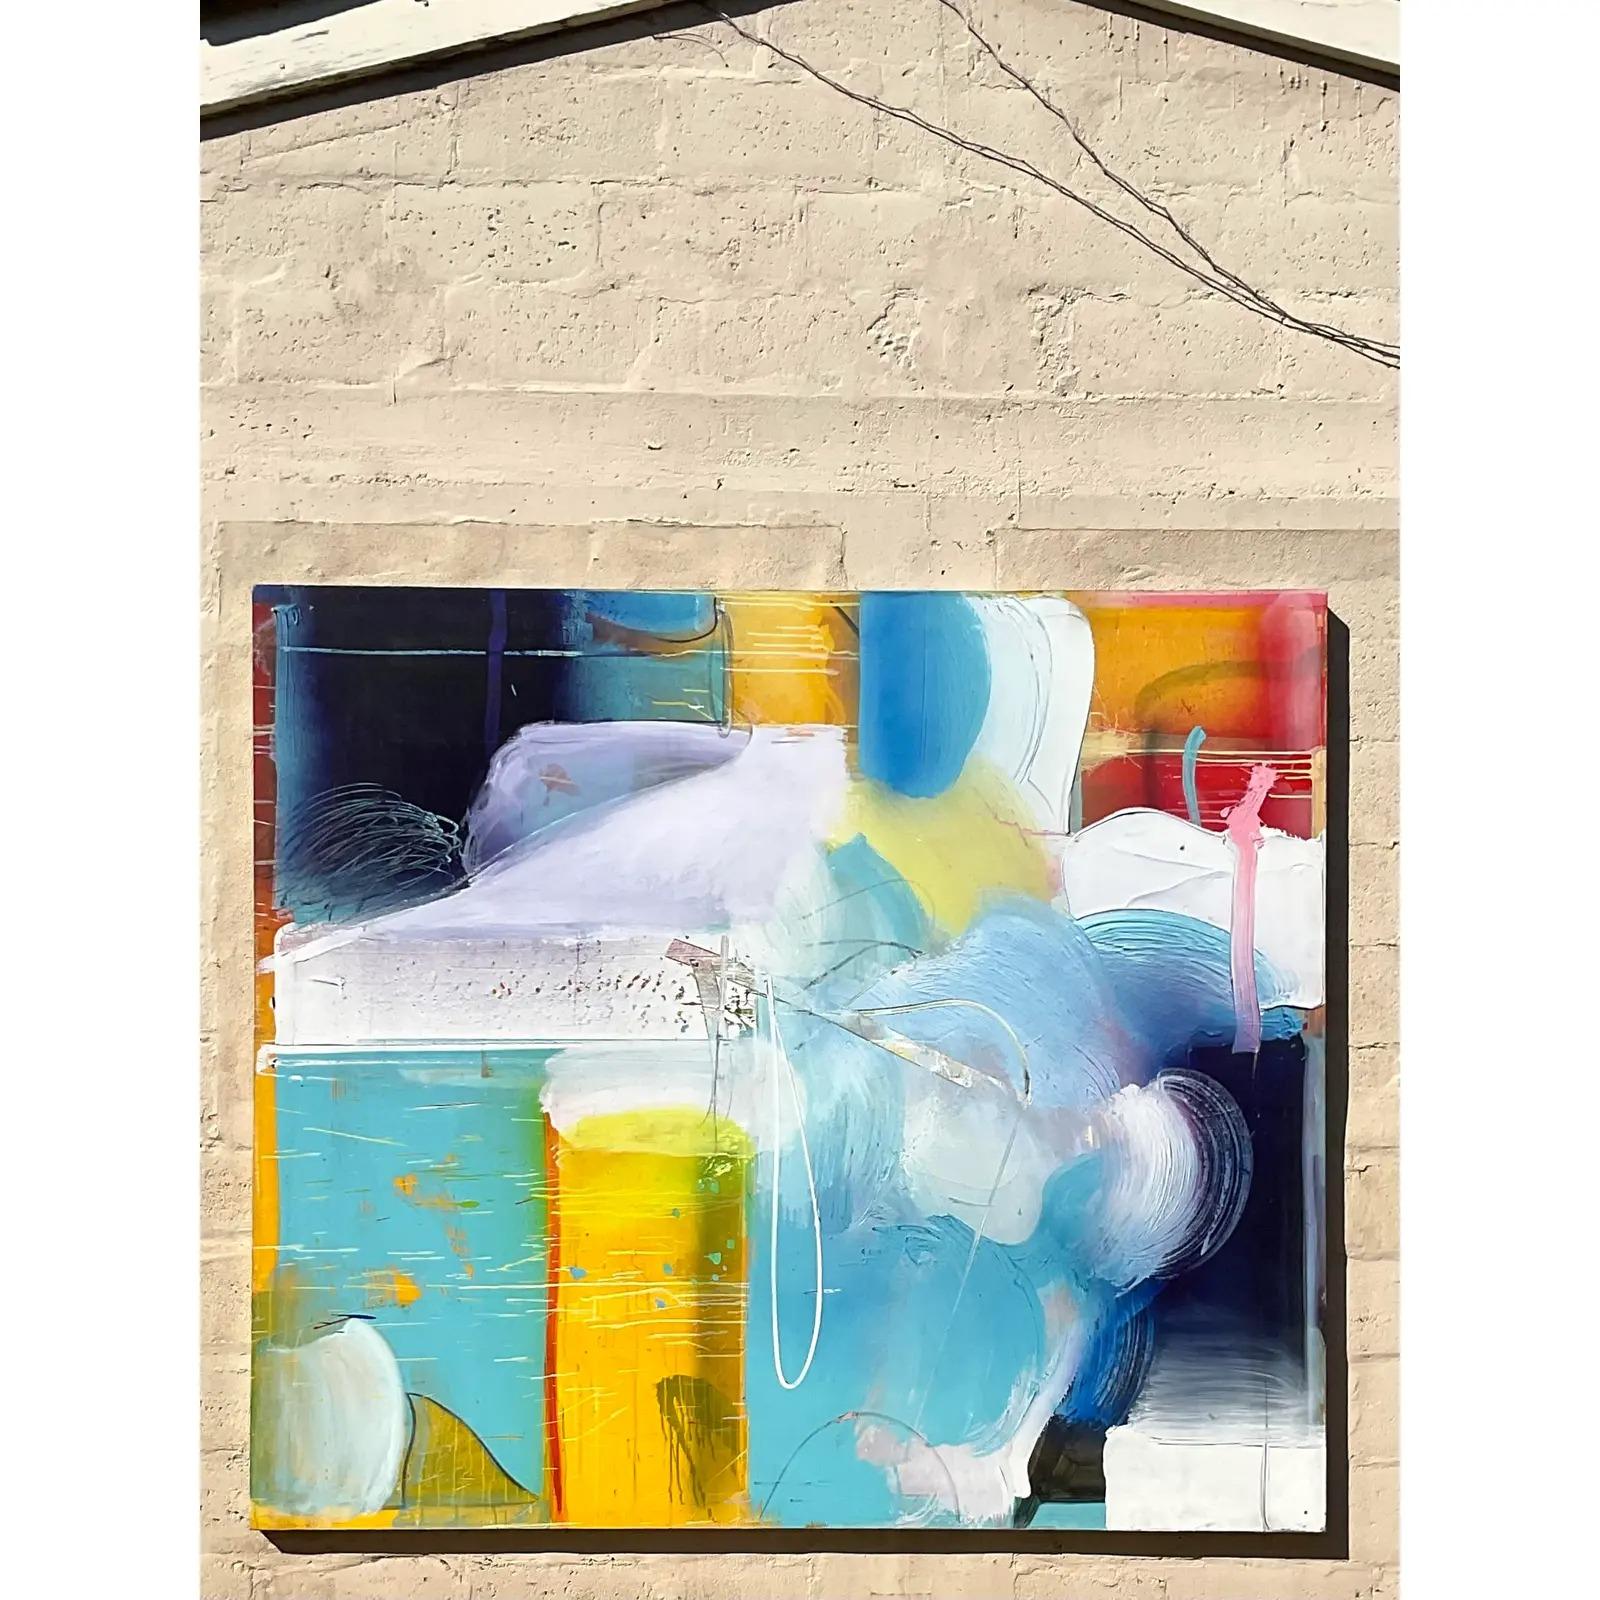 An incredible monumental vintage Contemporary oil painting on canvas. A fantastic Abstract in bright clear colors. Signed by the artist. Acquired from a Palm Beach estate.